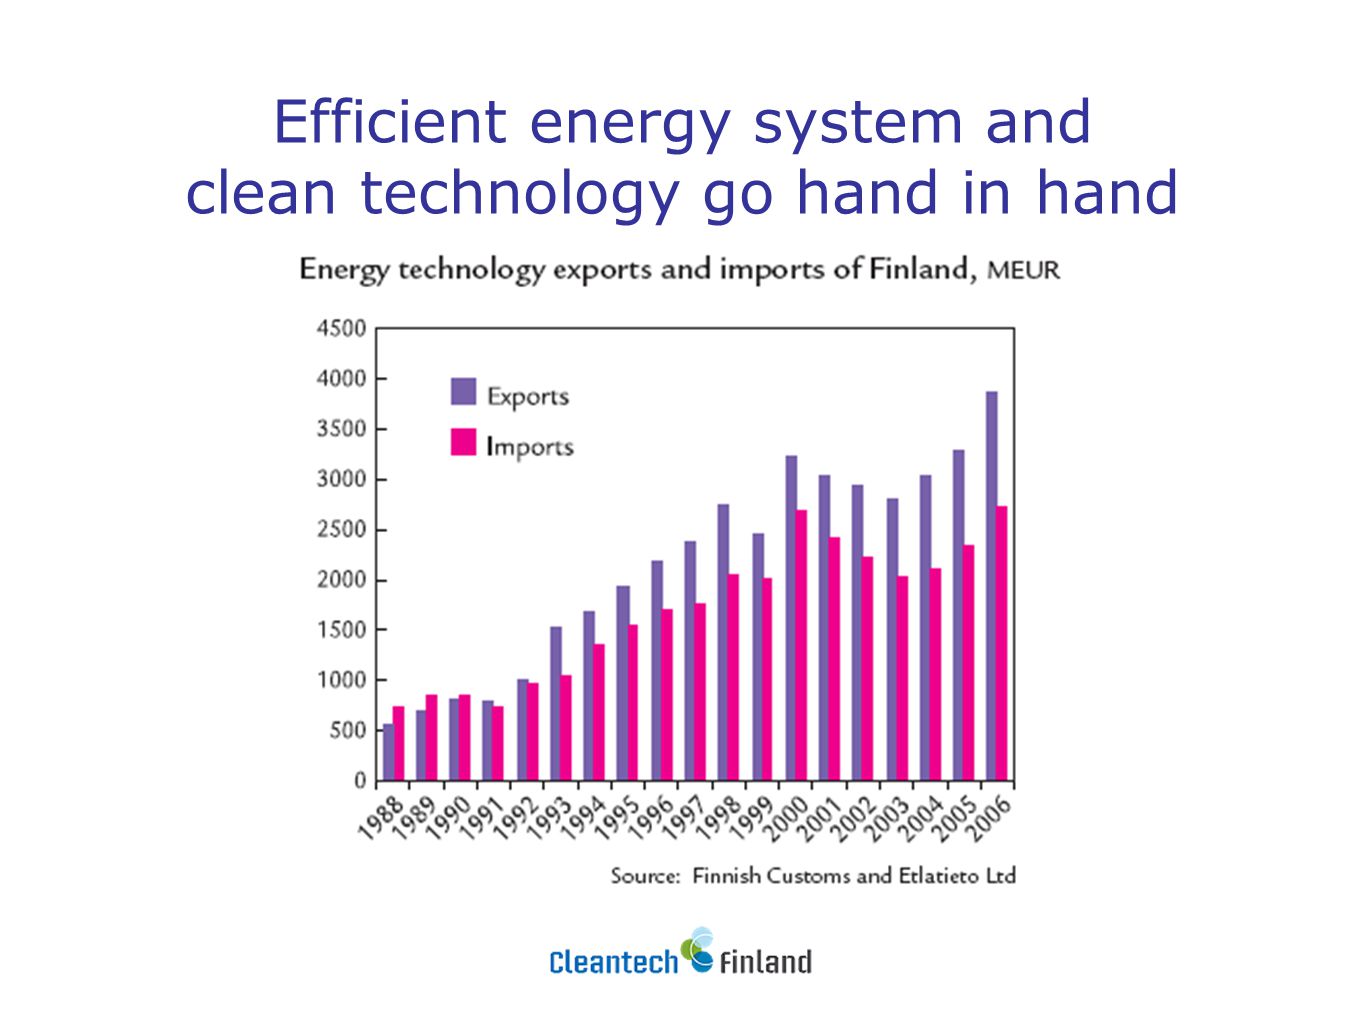 Efficient energy system and clean technology go hand in hand